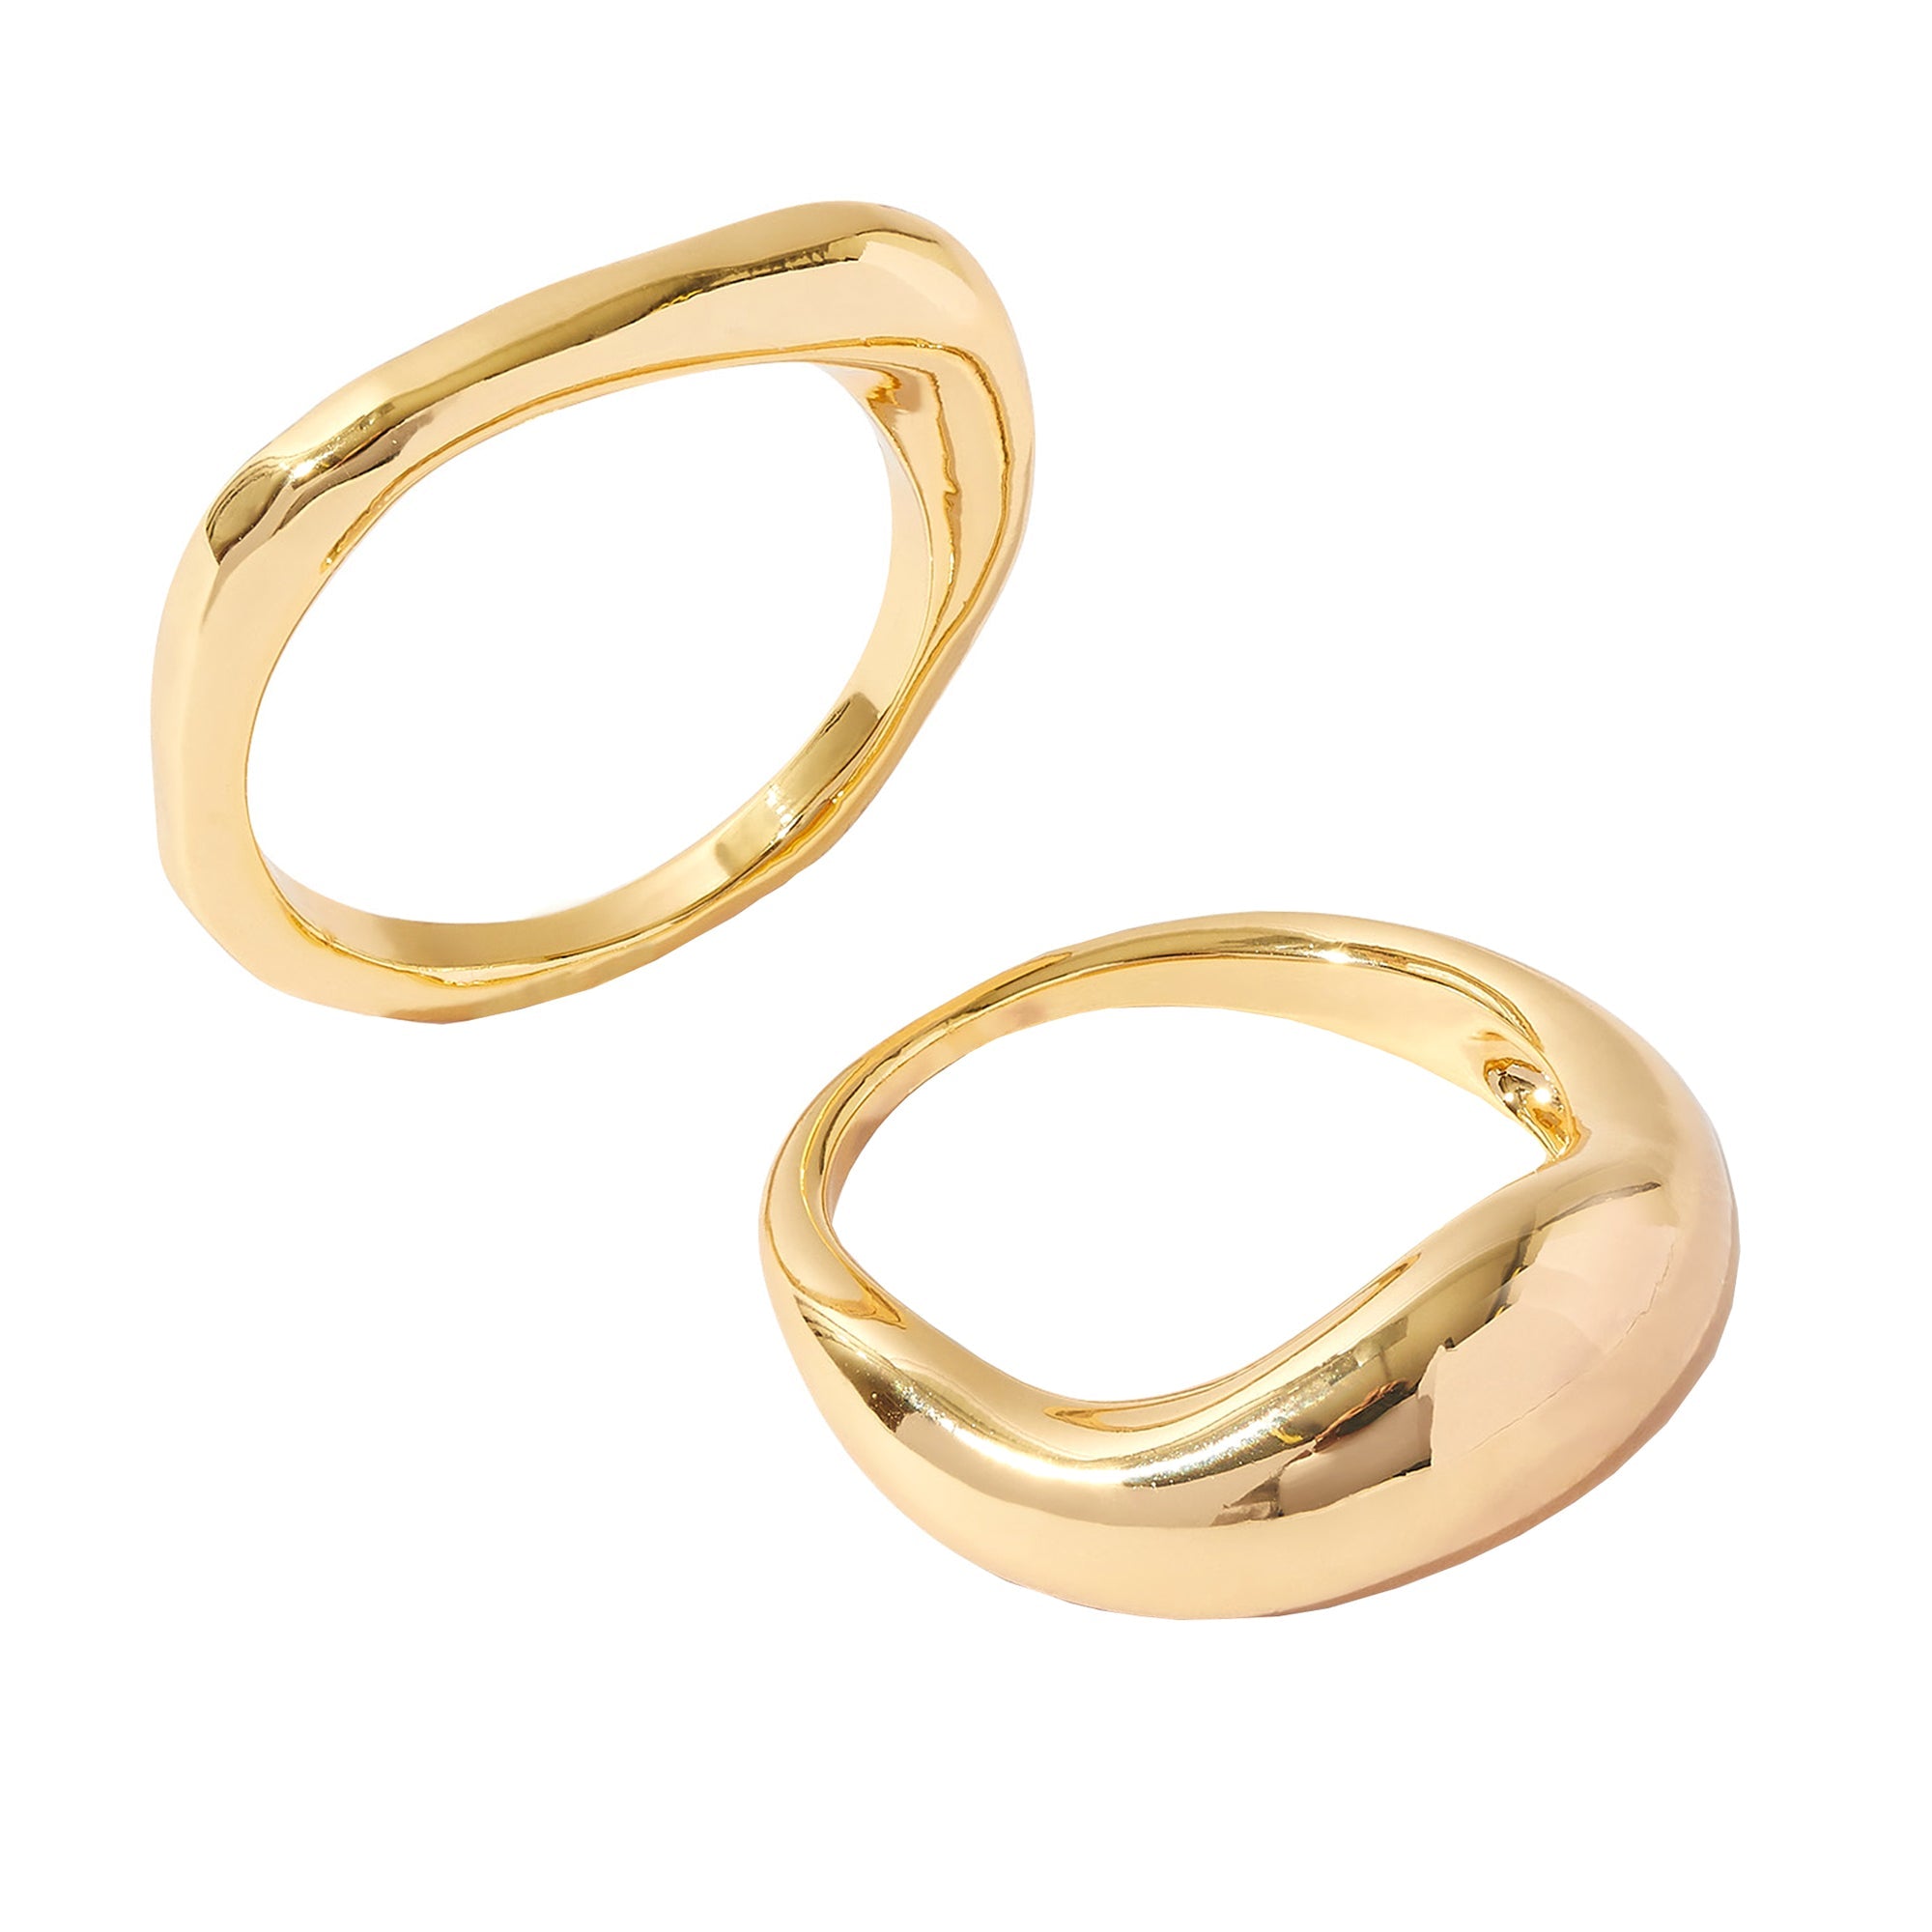 Real Gold Plated Z Set of 2 Smooth Irregular Ring For Women By Accessorize London-Medium